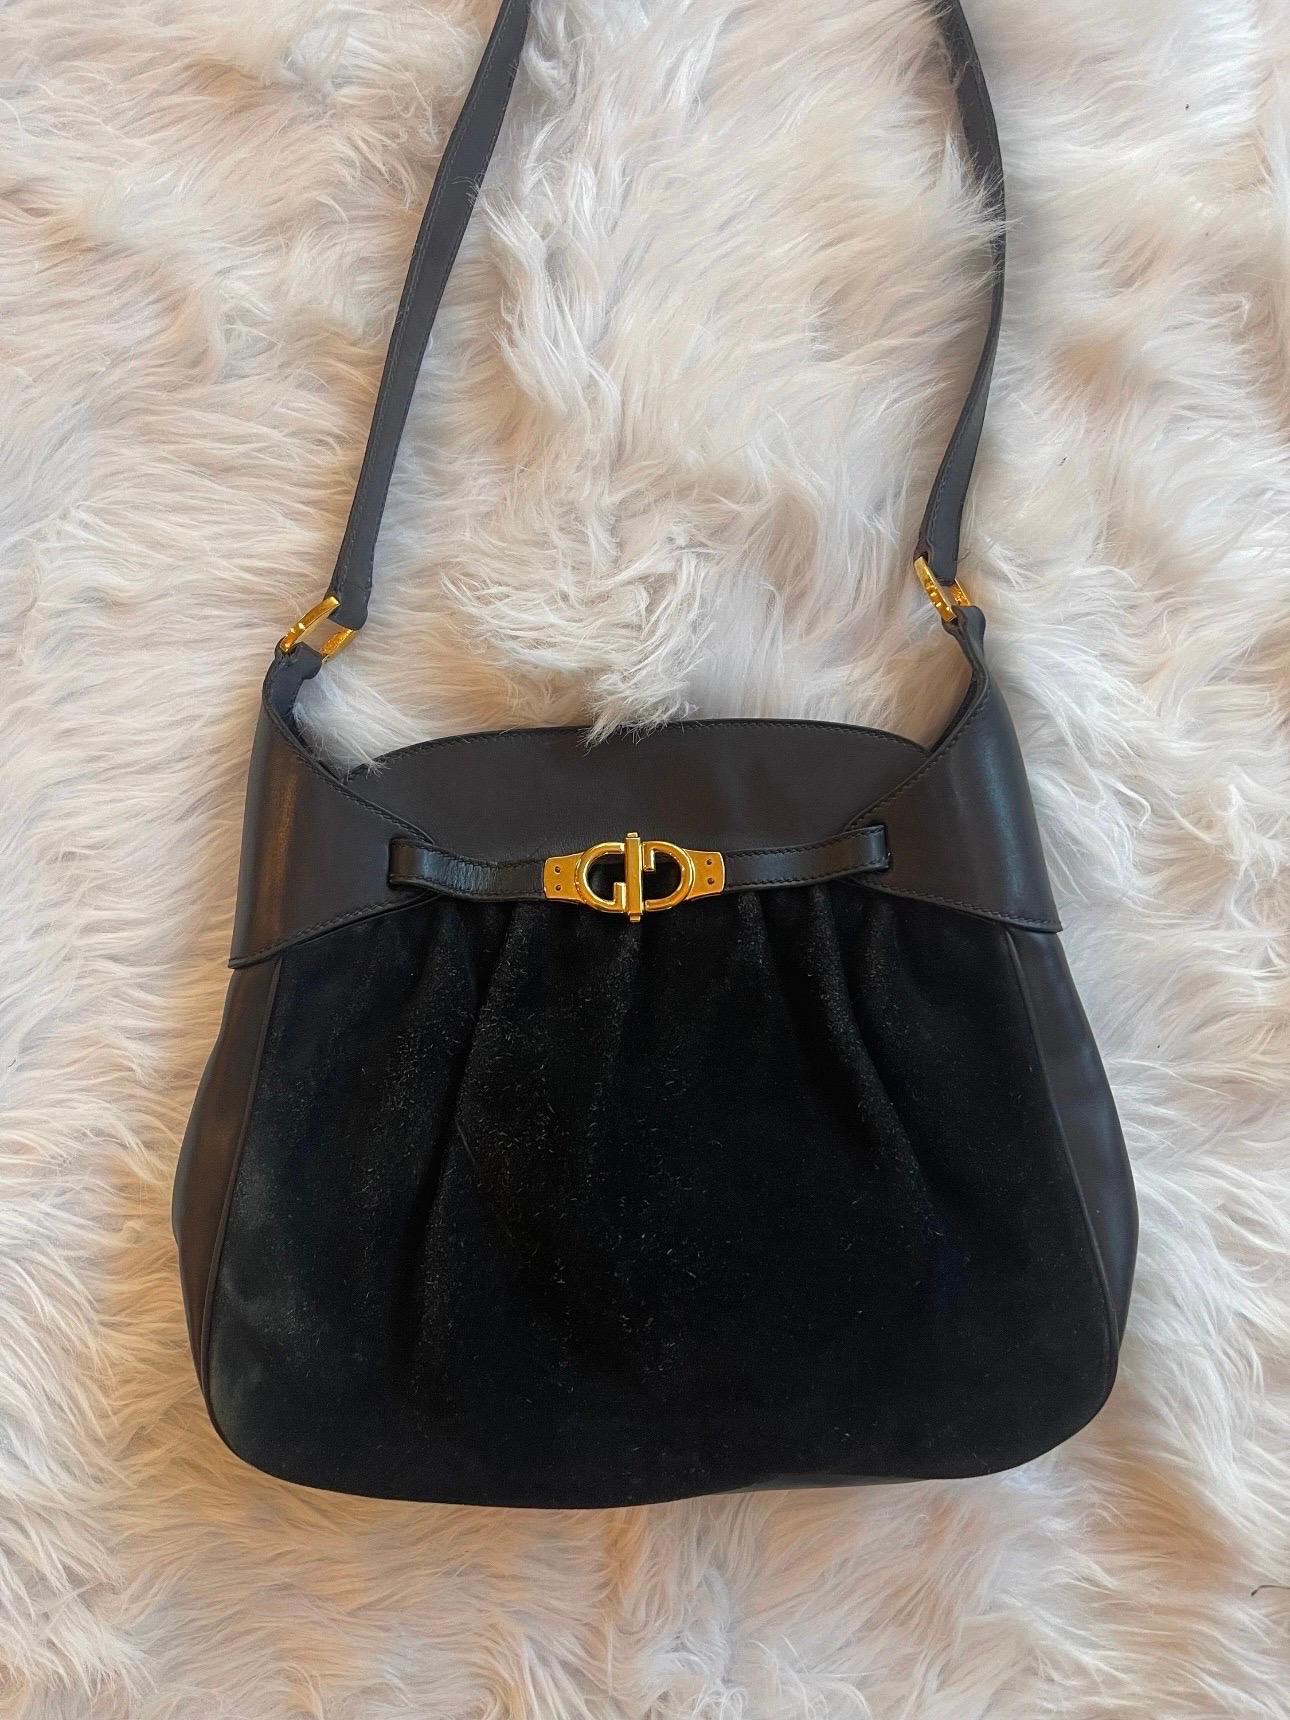 🖤1970’s GUCCI Perfection🖤

RARE and coveted black GUCCI Suede Shoulder Bag. 

Black smooth leather with supple suede and oversized GG hardware make this an instant classic!

Condition:
This Gucci bag is in very good vintage condition and shows